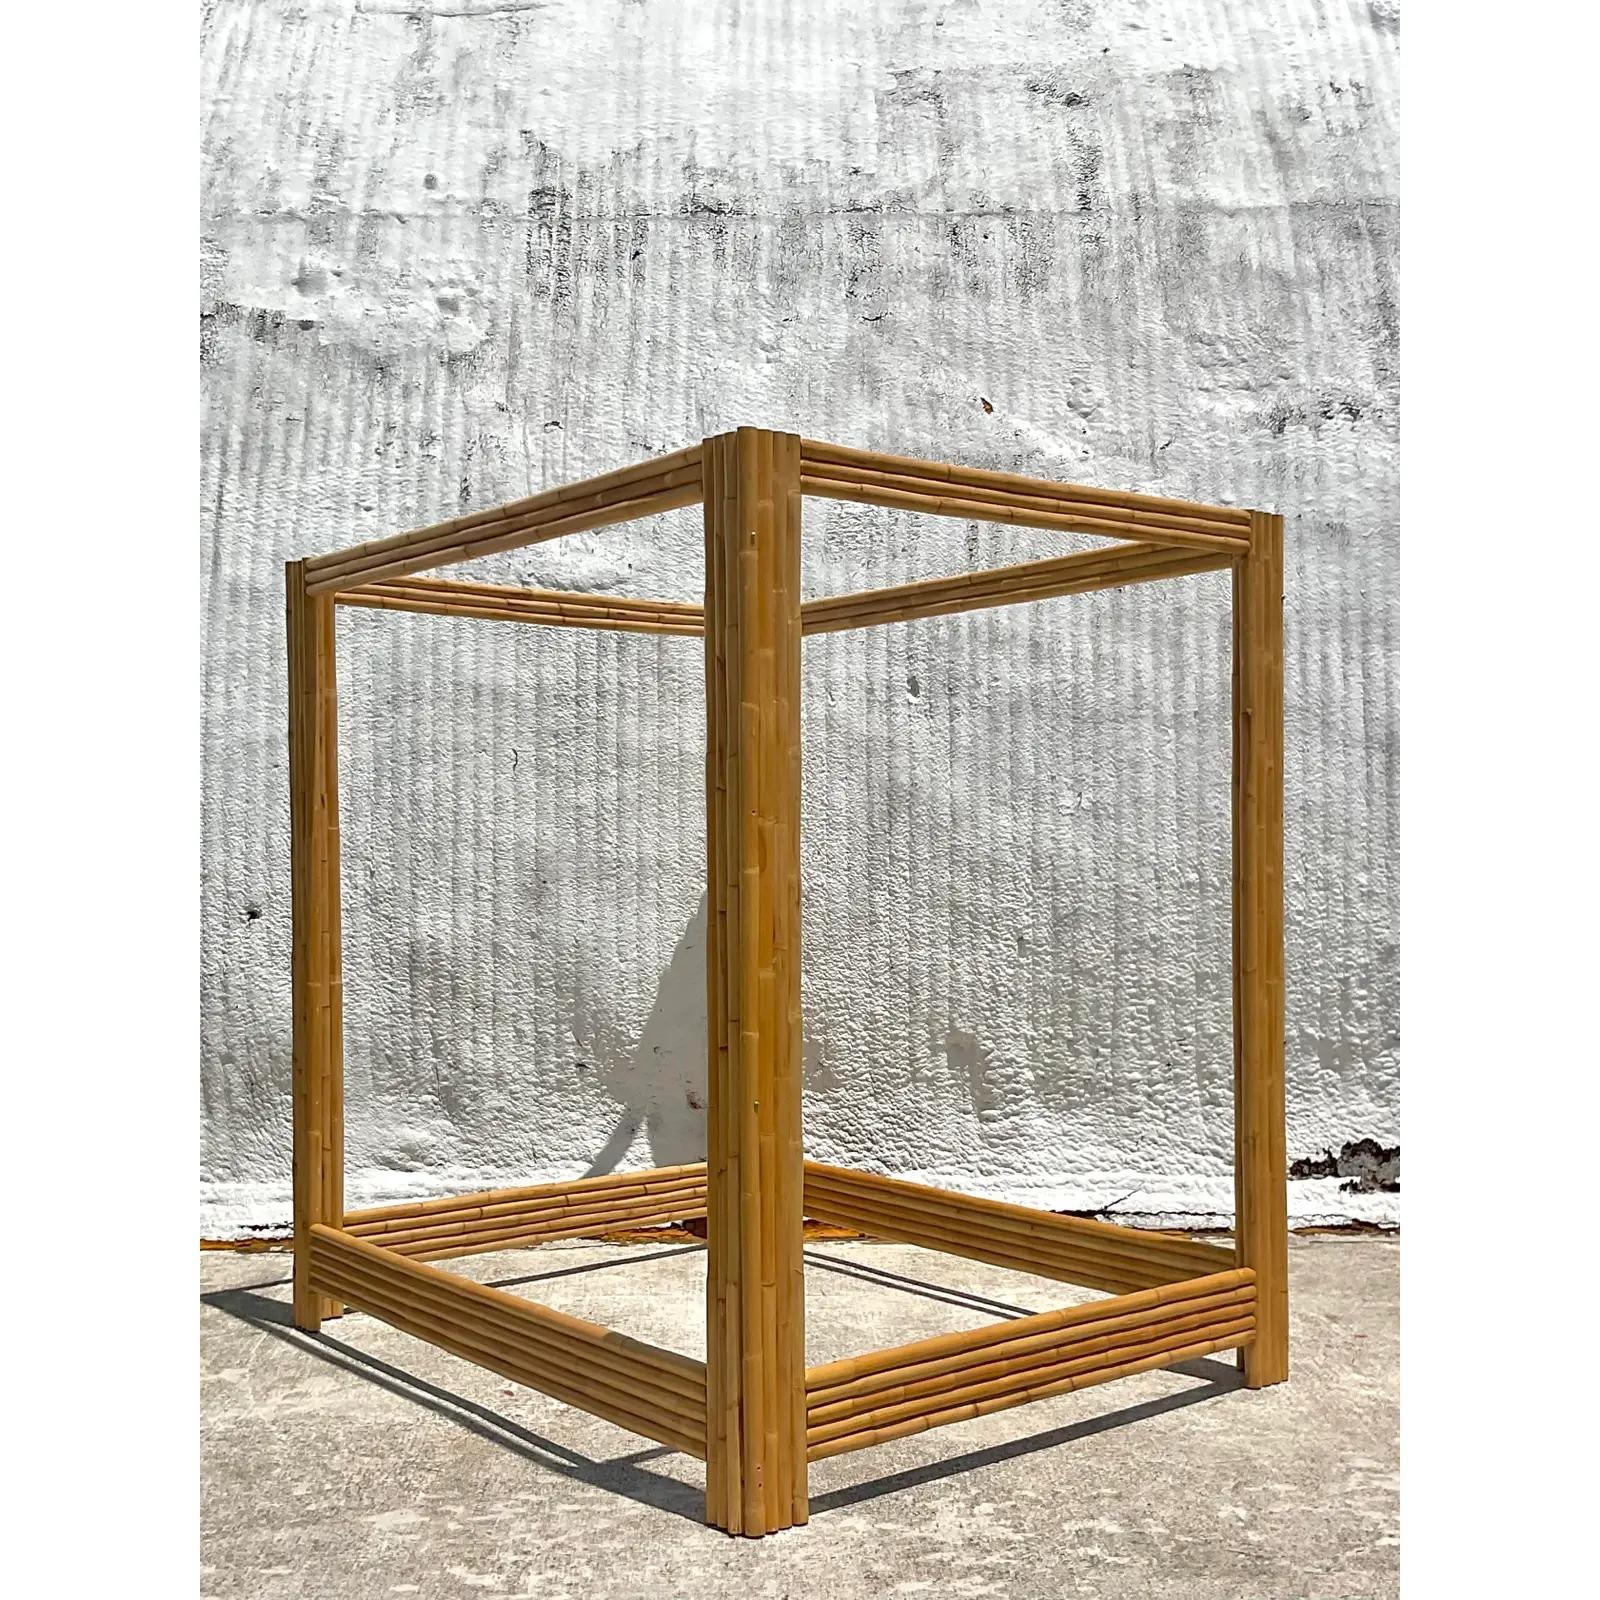 A fabulous vintage Coastal Full canopy bed. A chic rattan frame in a clean and simple design. Perfect to add a little drama and excitement to any space. Acquired from a Palm Beach estate.

The bed is in great vintage condition. Minor scuffs and